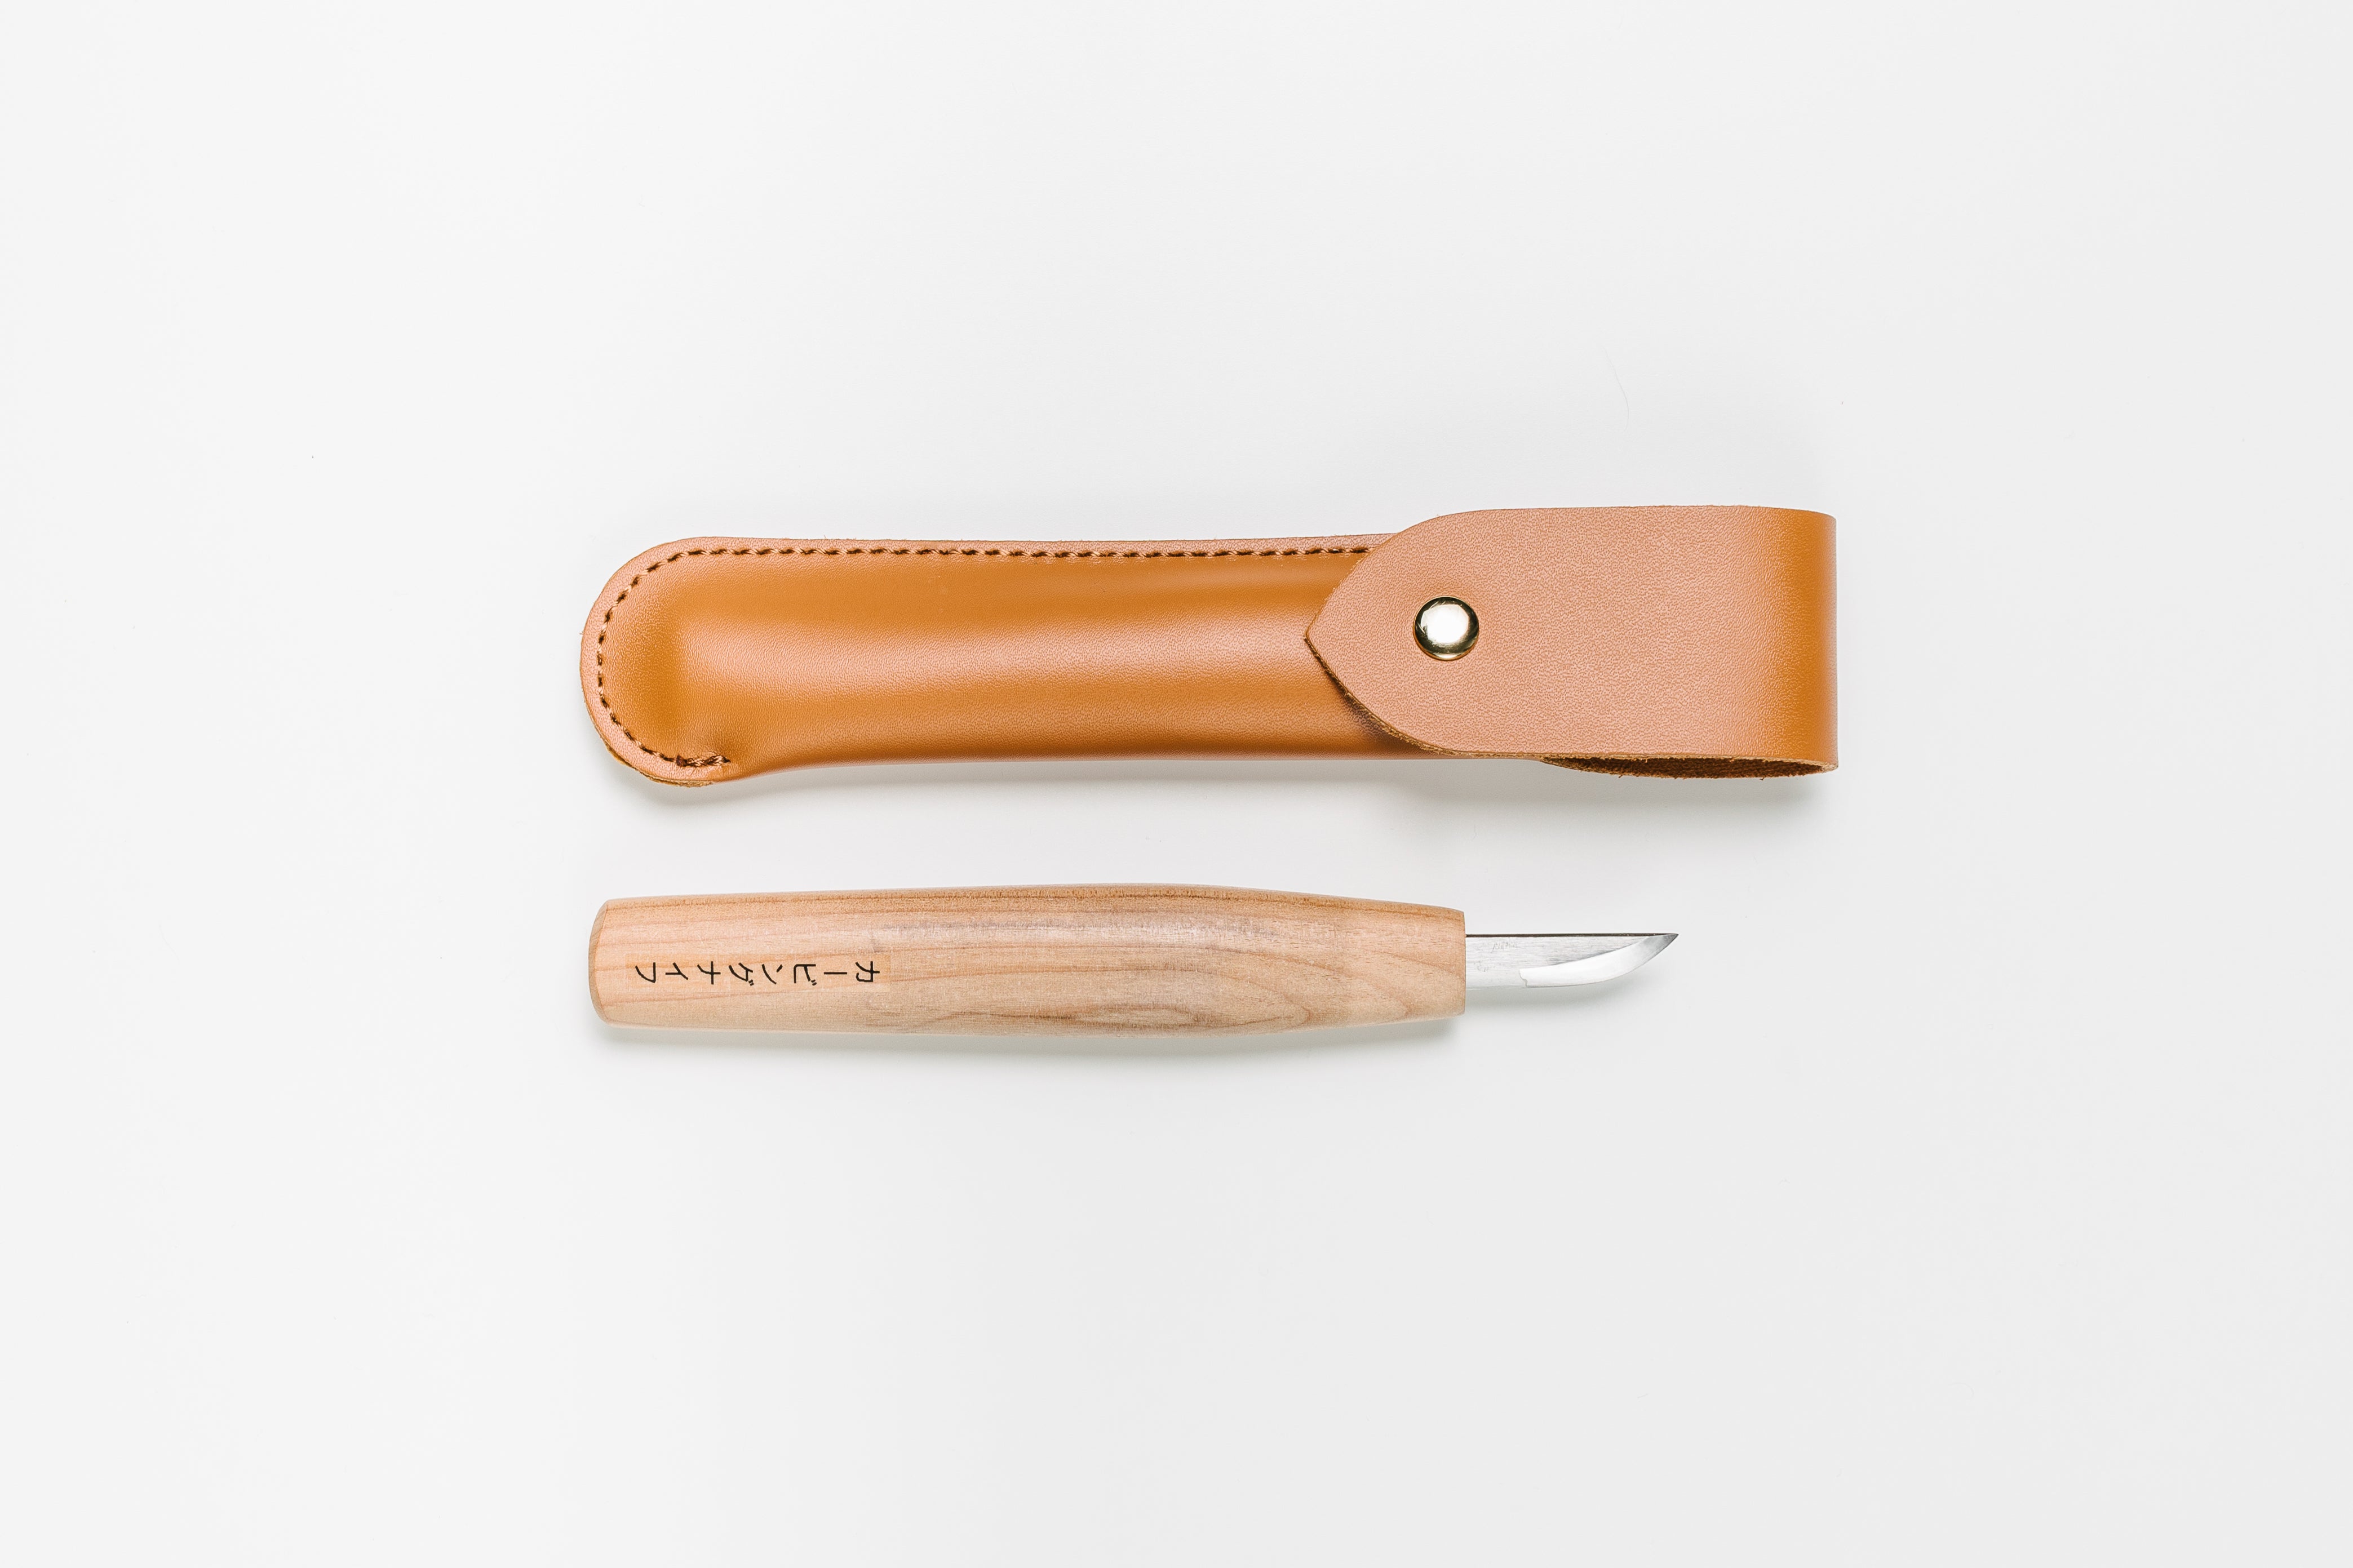 http://cdn.shopify.com/s/files/1/0119/7149/3947/products/MAD_Japanese_Carving_Knife_Leather_Case_1.jpg?v=1654632375